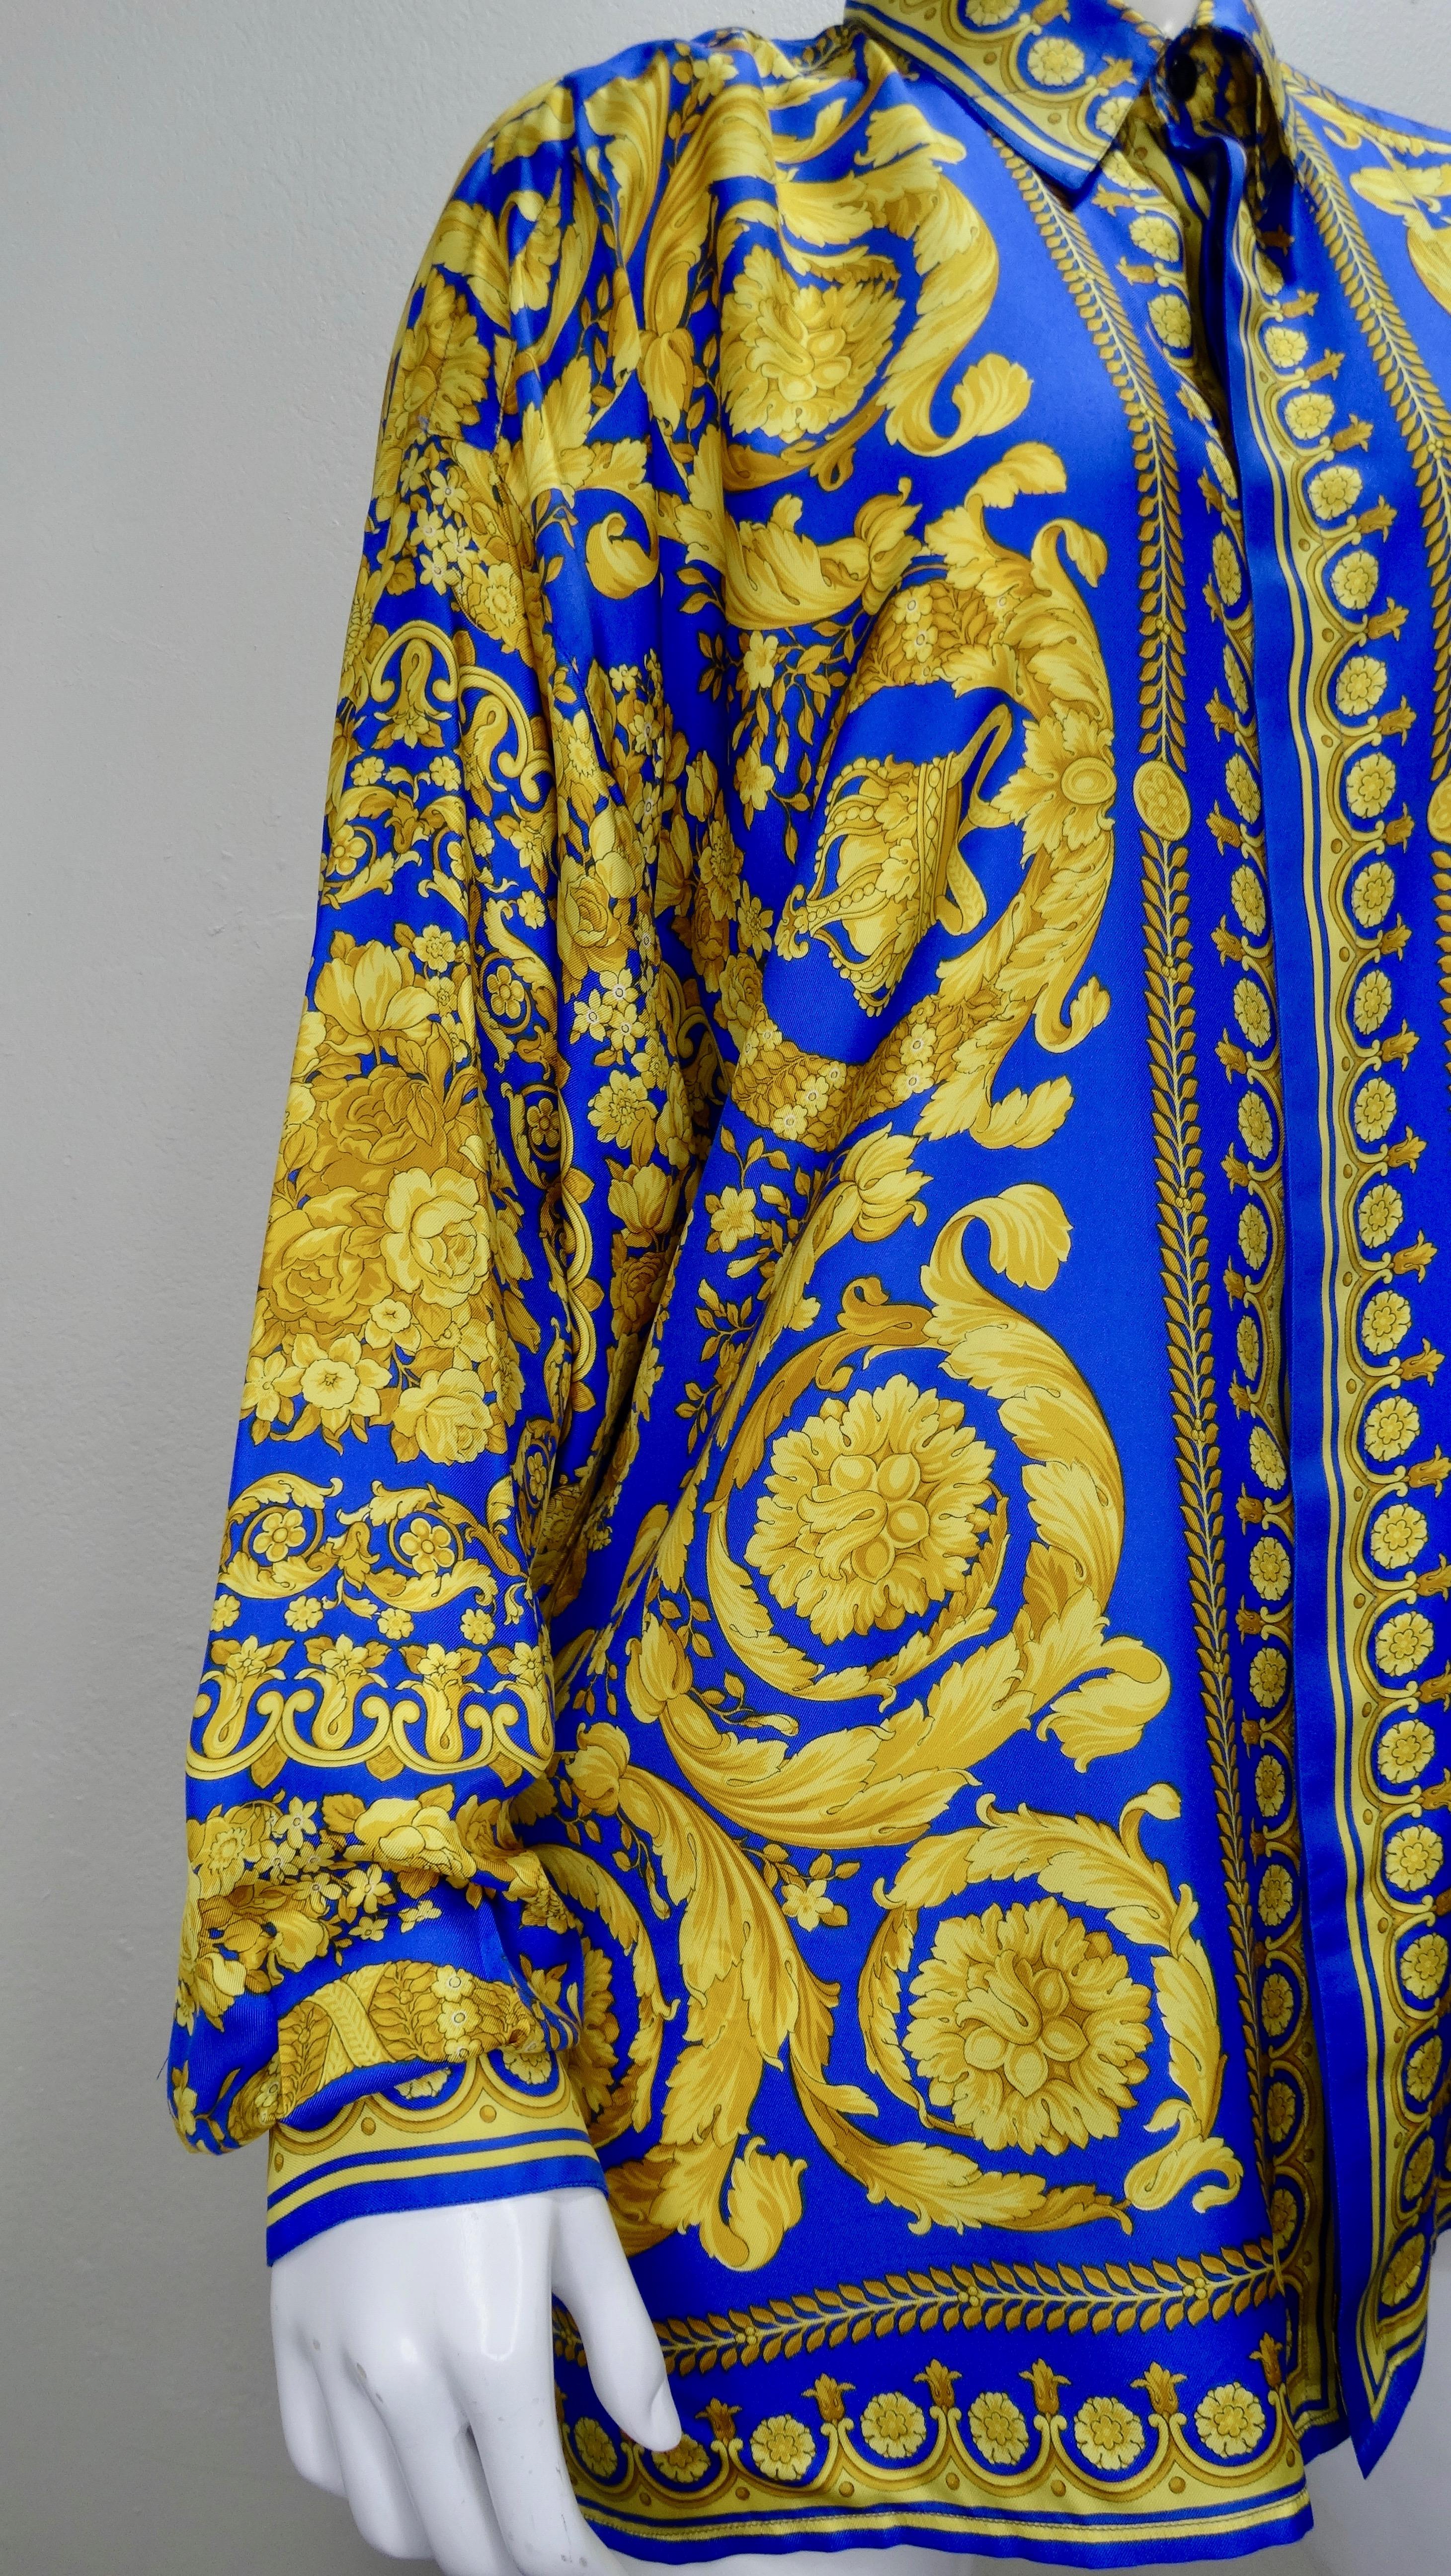 We all need a classic Versace Silk shirt in our wardrobe! Circa 1990s, this royal blue and gold Versace Silk long sleeve button up features one of Gianni Versace's signature Baroque style prints mixed with floral arrangements and crowns. Includes a